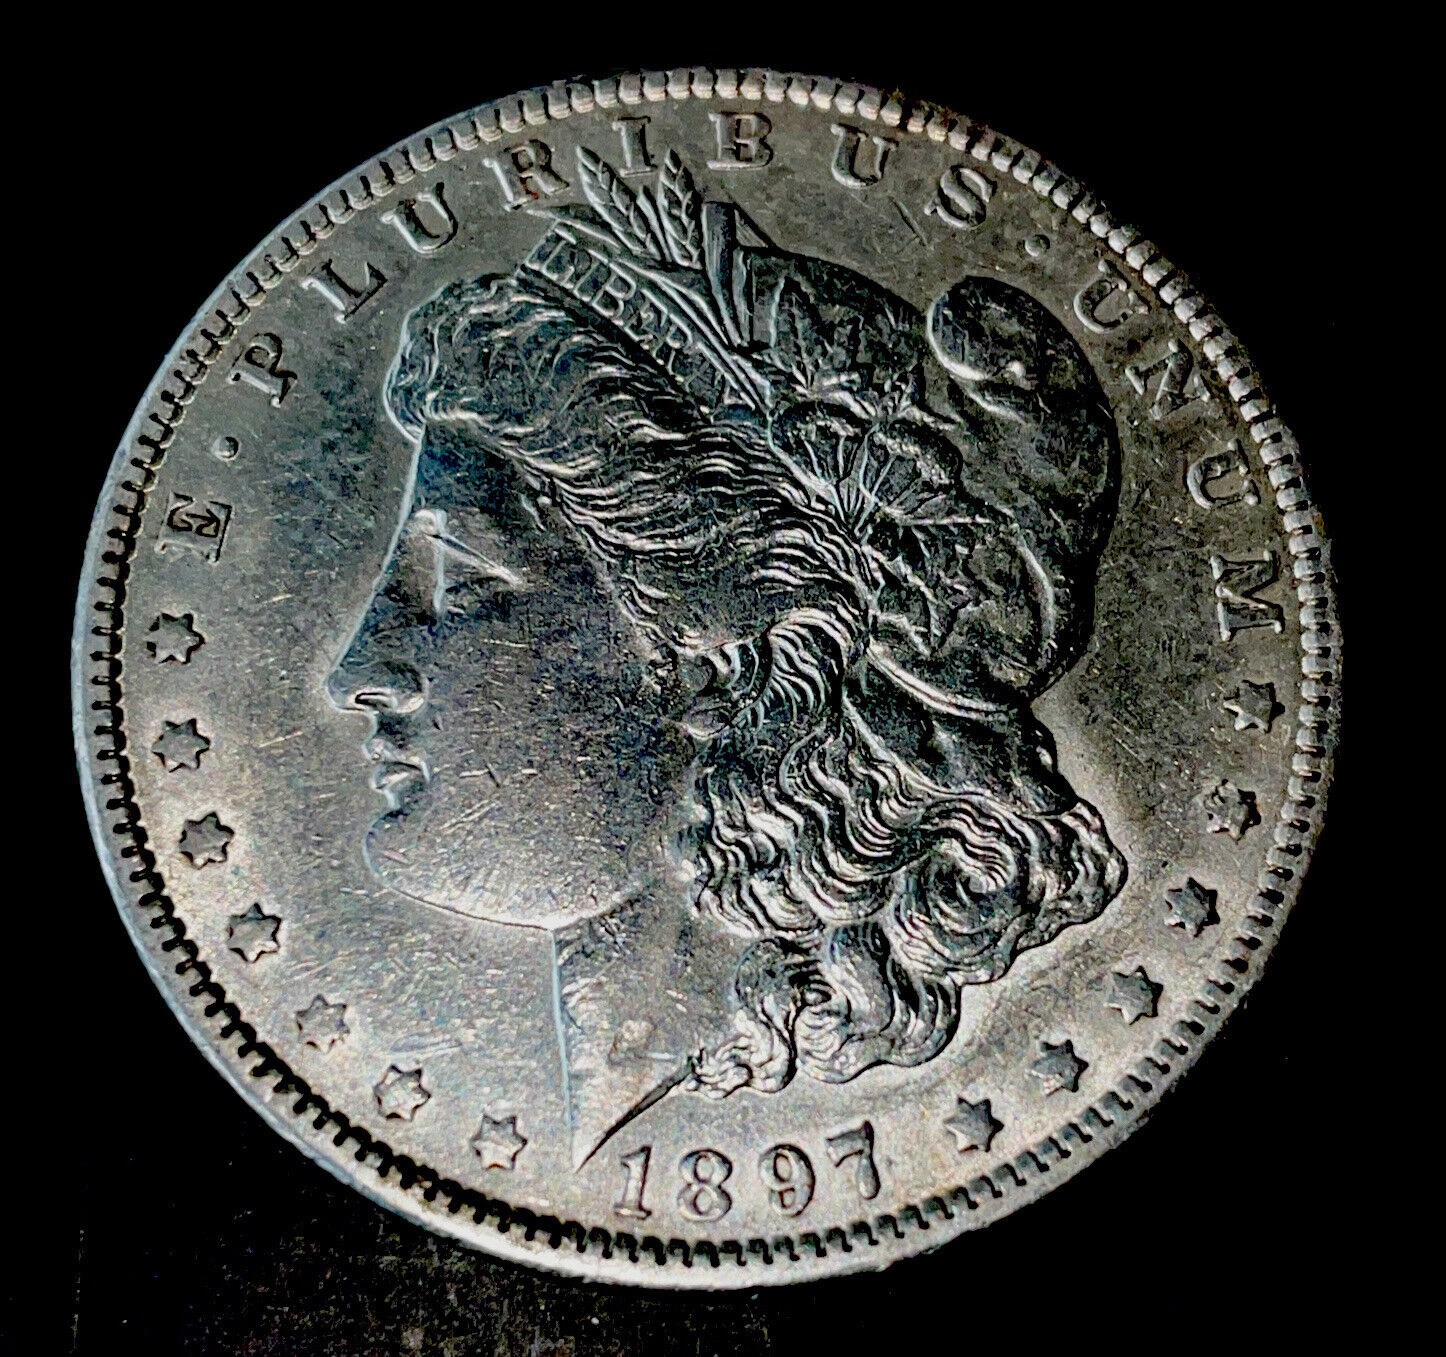 Scarce 1897 o Choice Almost Uncirculated $ nice overall look$$$